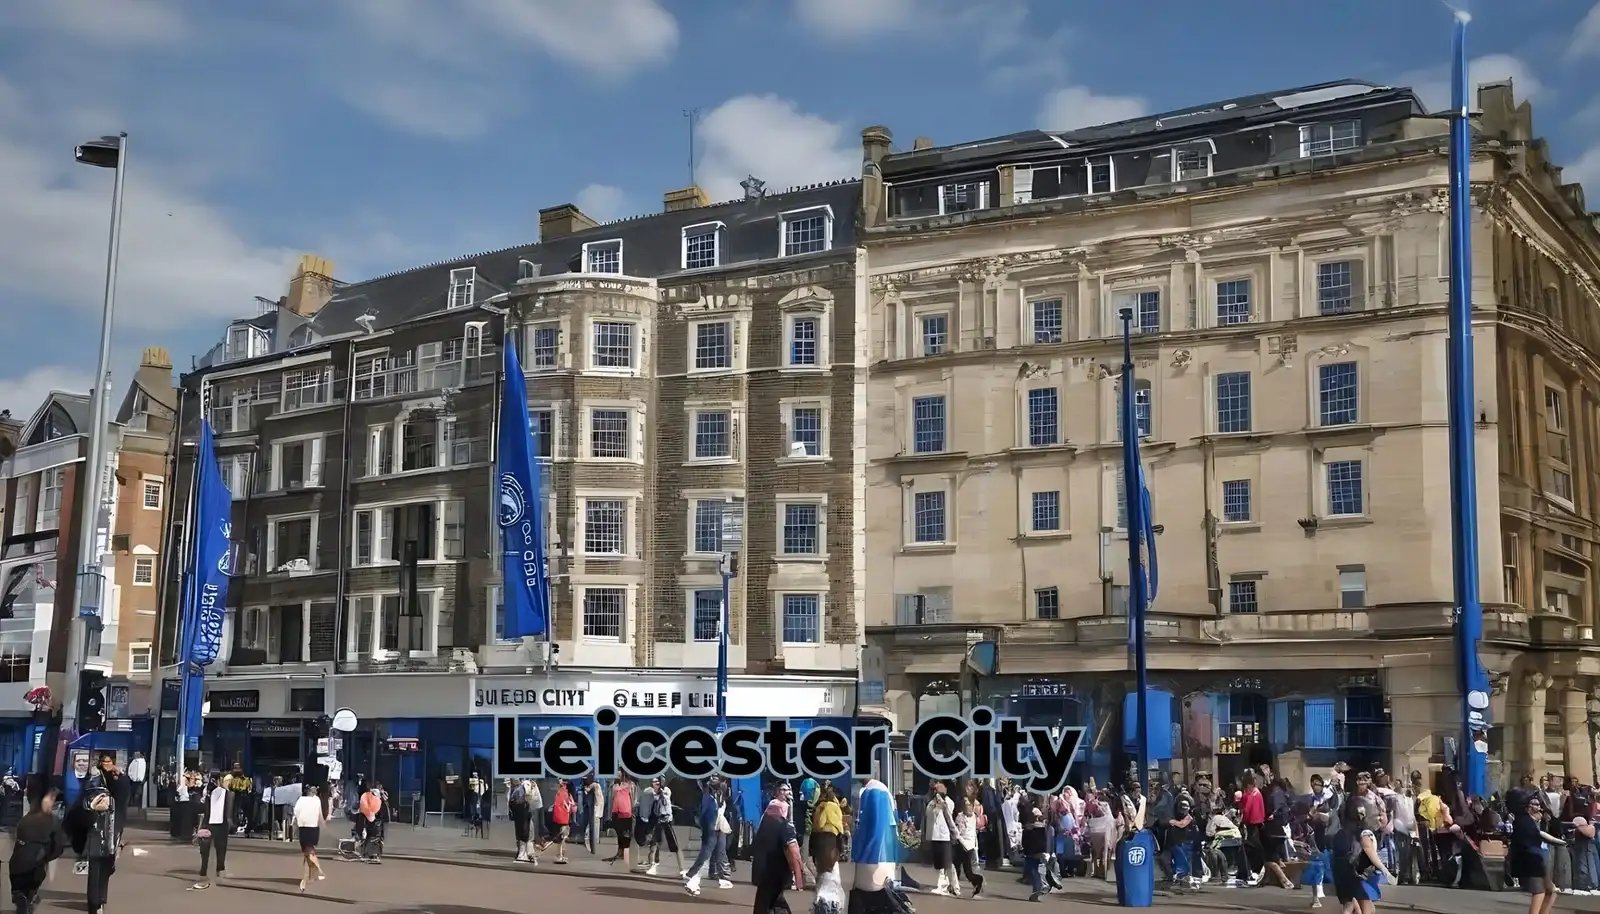 Crowd of fans outside the Leicester City football club store on a sunny day.